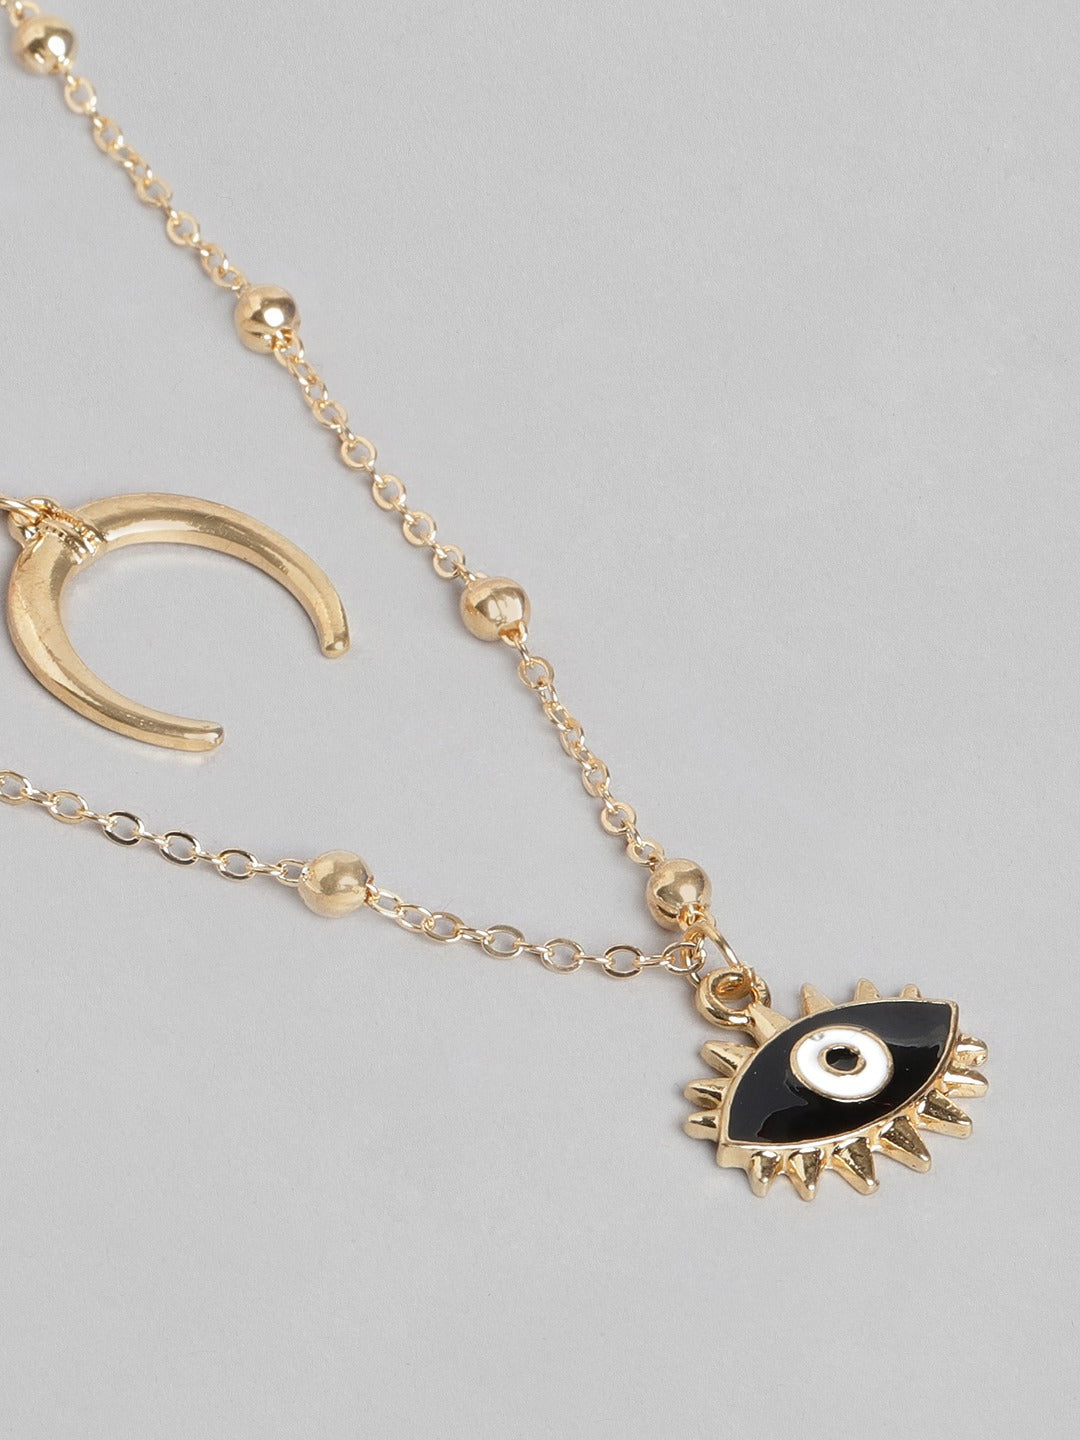 Blueberry gold plated Evil eye chain layered pendant detailing necklace